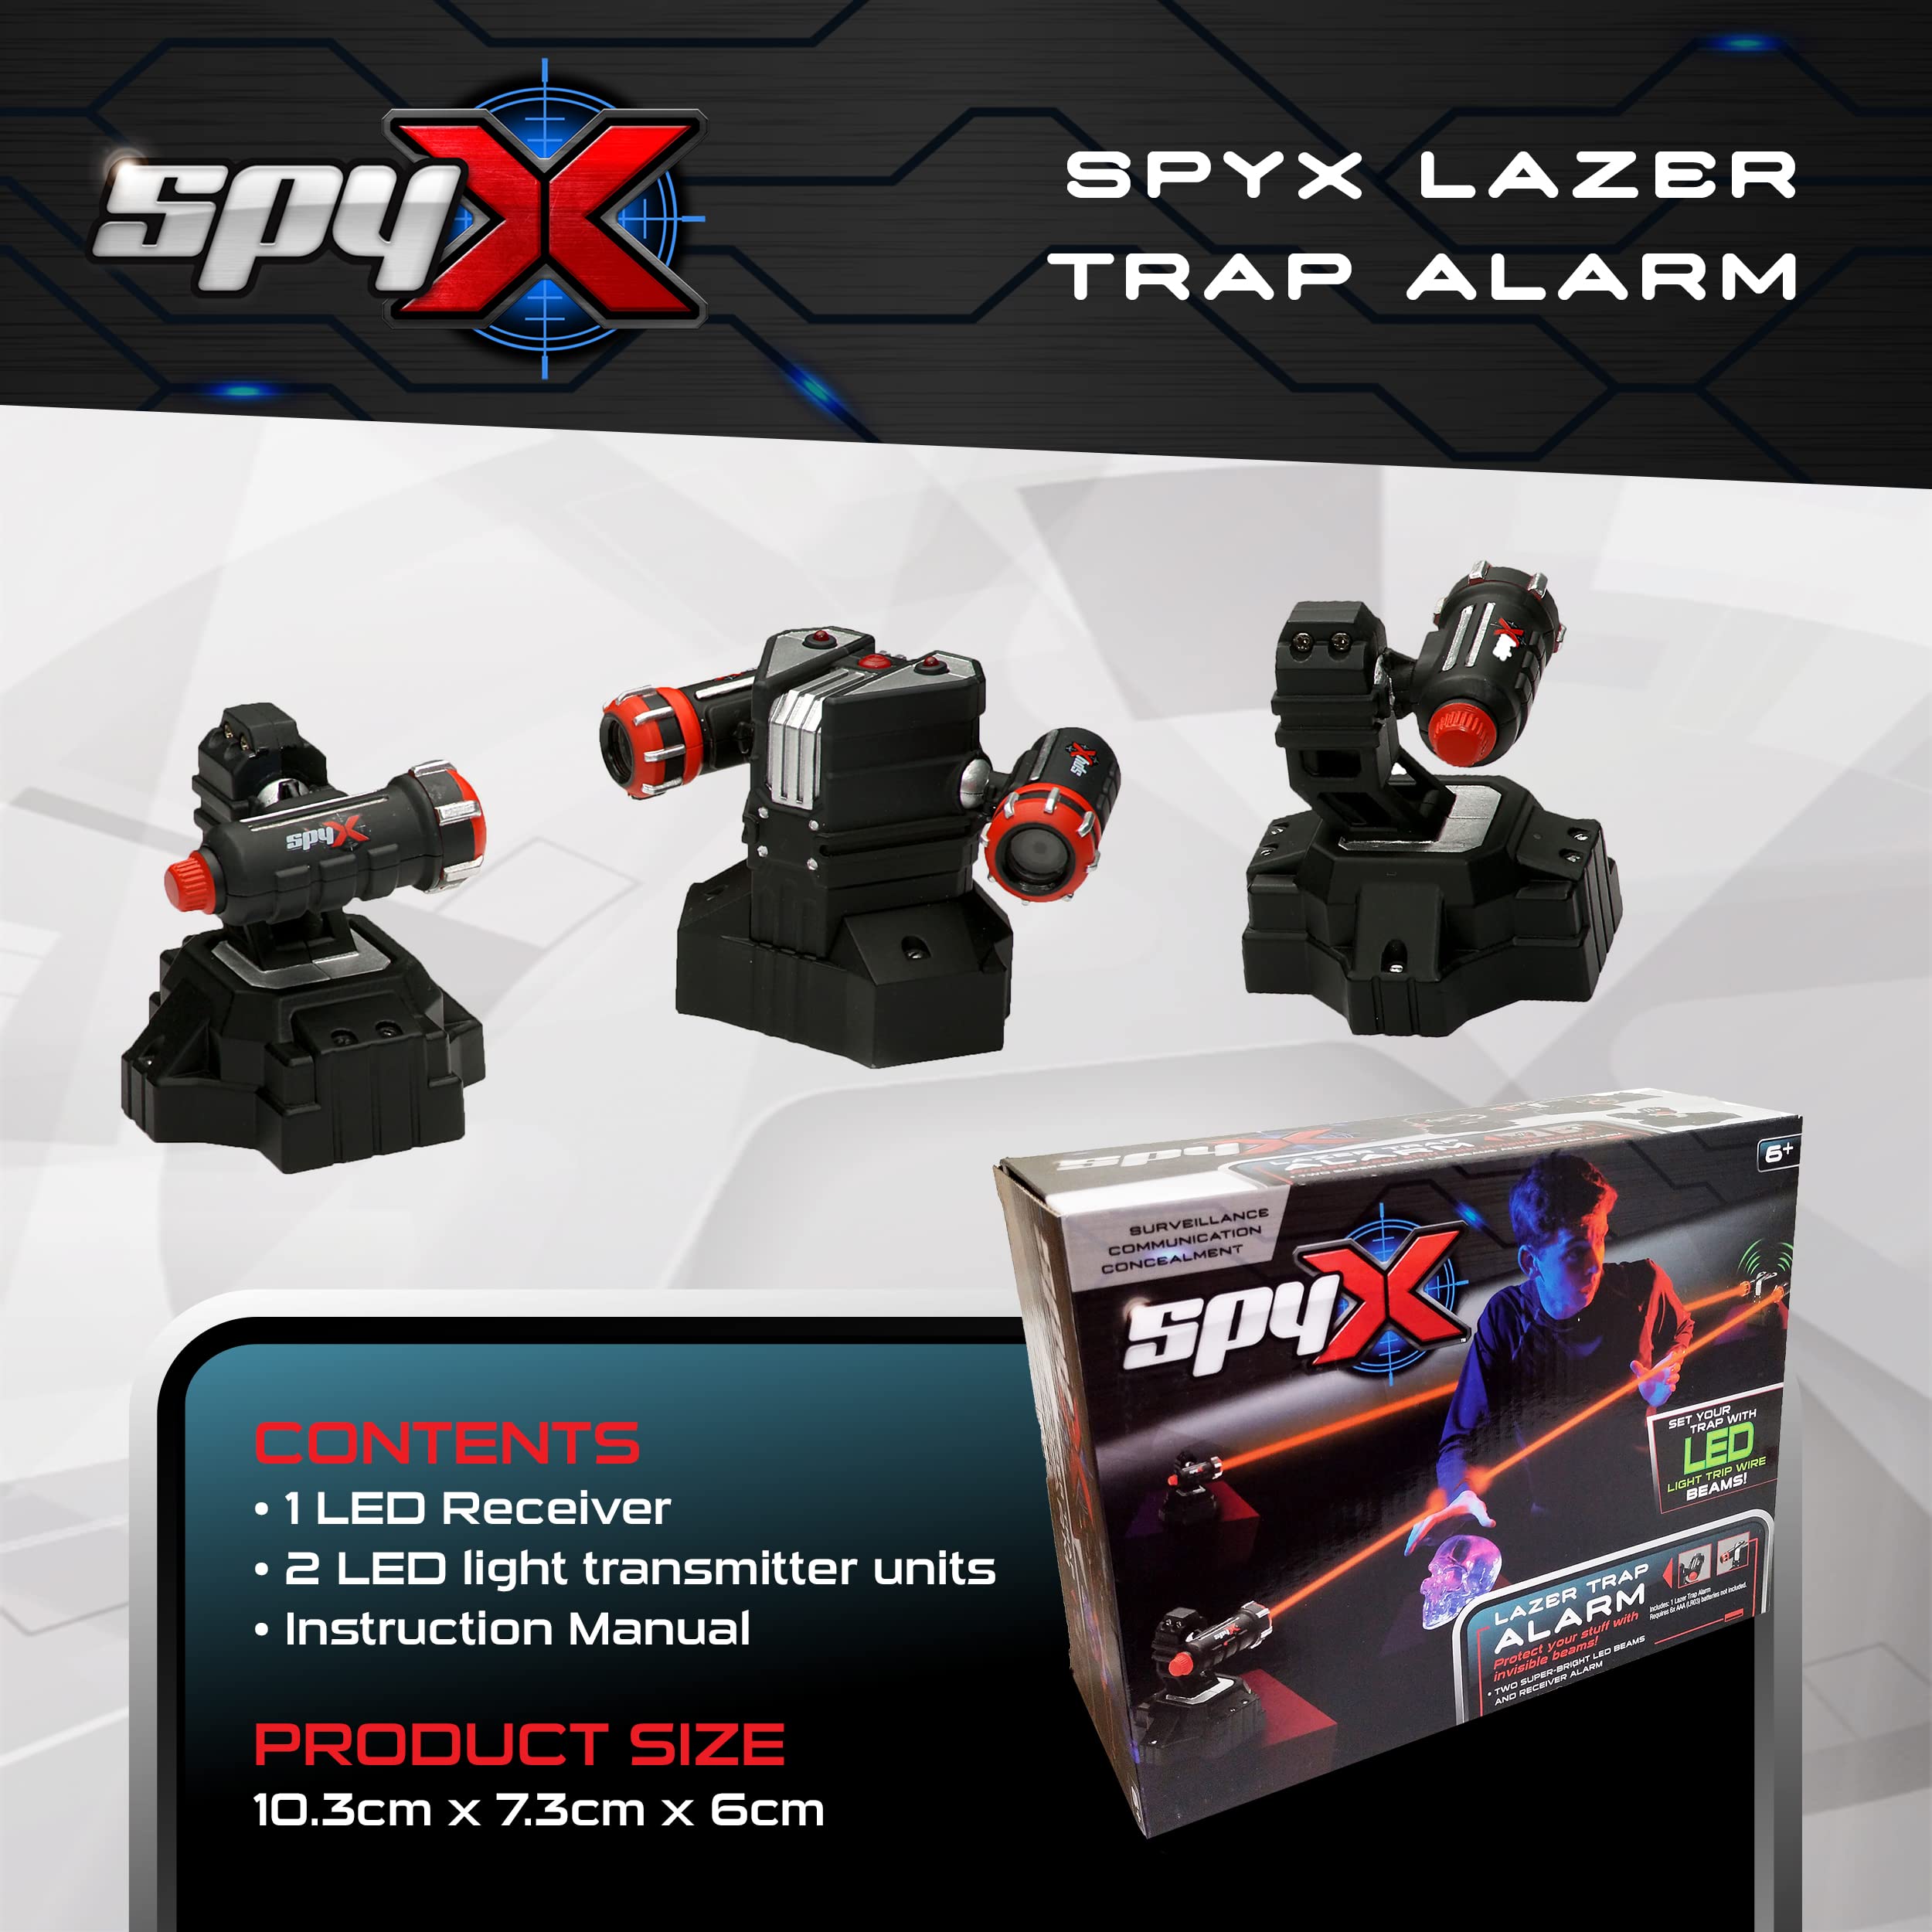 SpyX / Lazer Trap Alarm – Safe Laser Alarm Toy for Spy Kids to Protect Stuffs. Invisible Infrared Beam Spy Gadget for Kids. Motion Sensor/Detector Toy for Boys & Girls